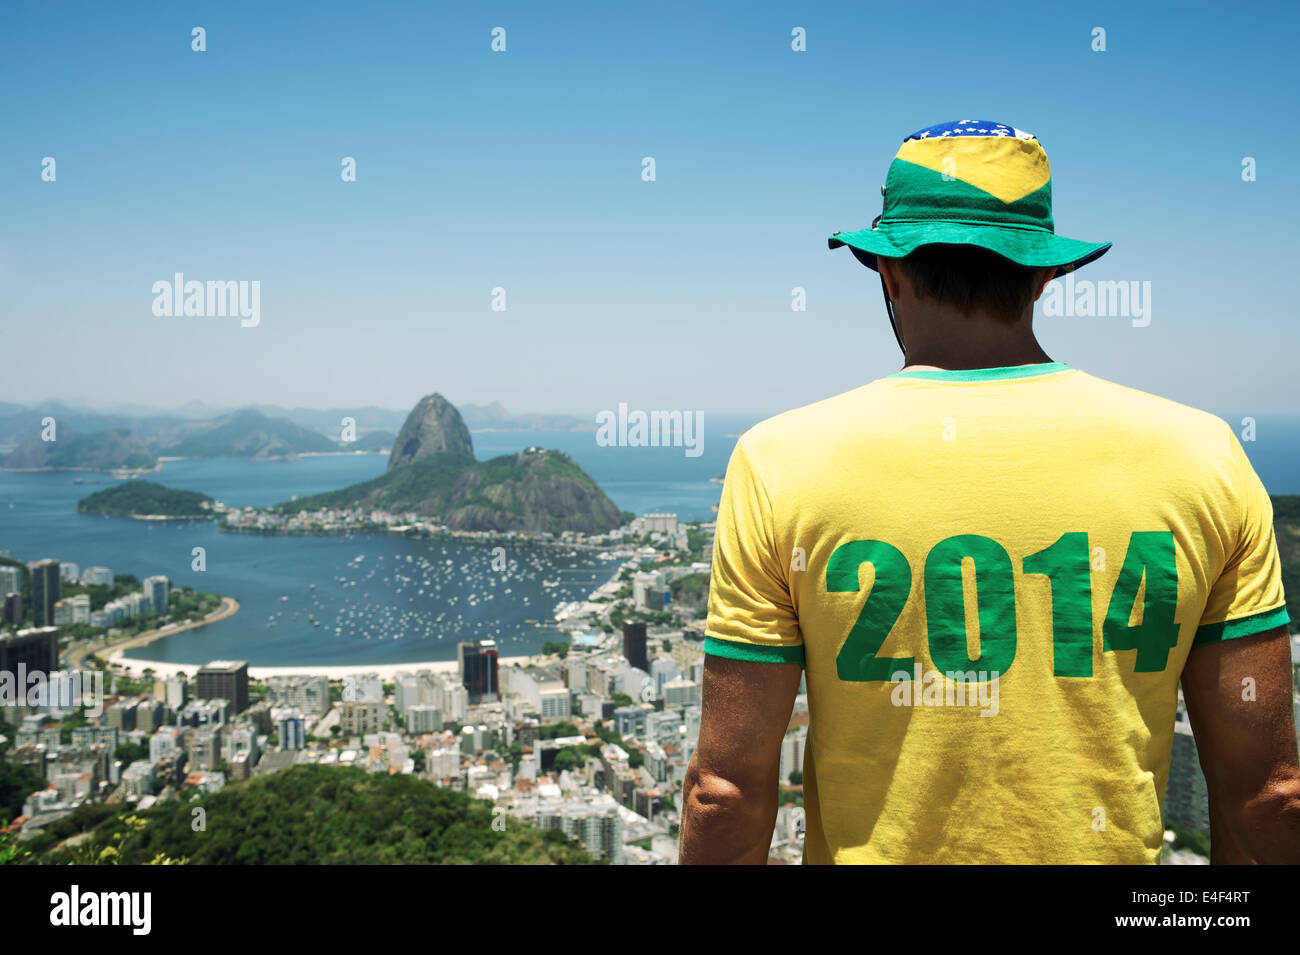 Man in Brazil hat and 2014 shirt standing at bright sunny Rio de Janeiro skyline with Sugarloaf Pao de Acucar Mountain Stock Photo